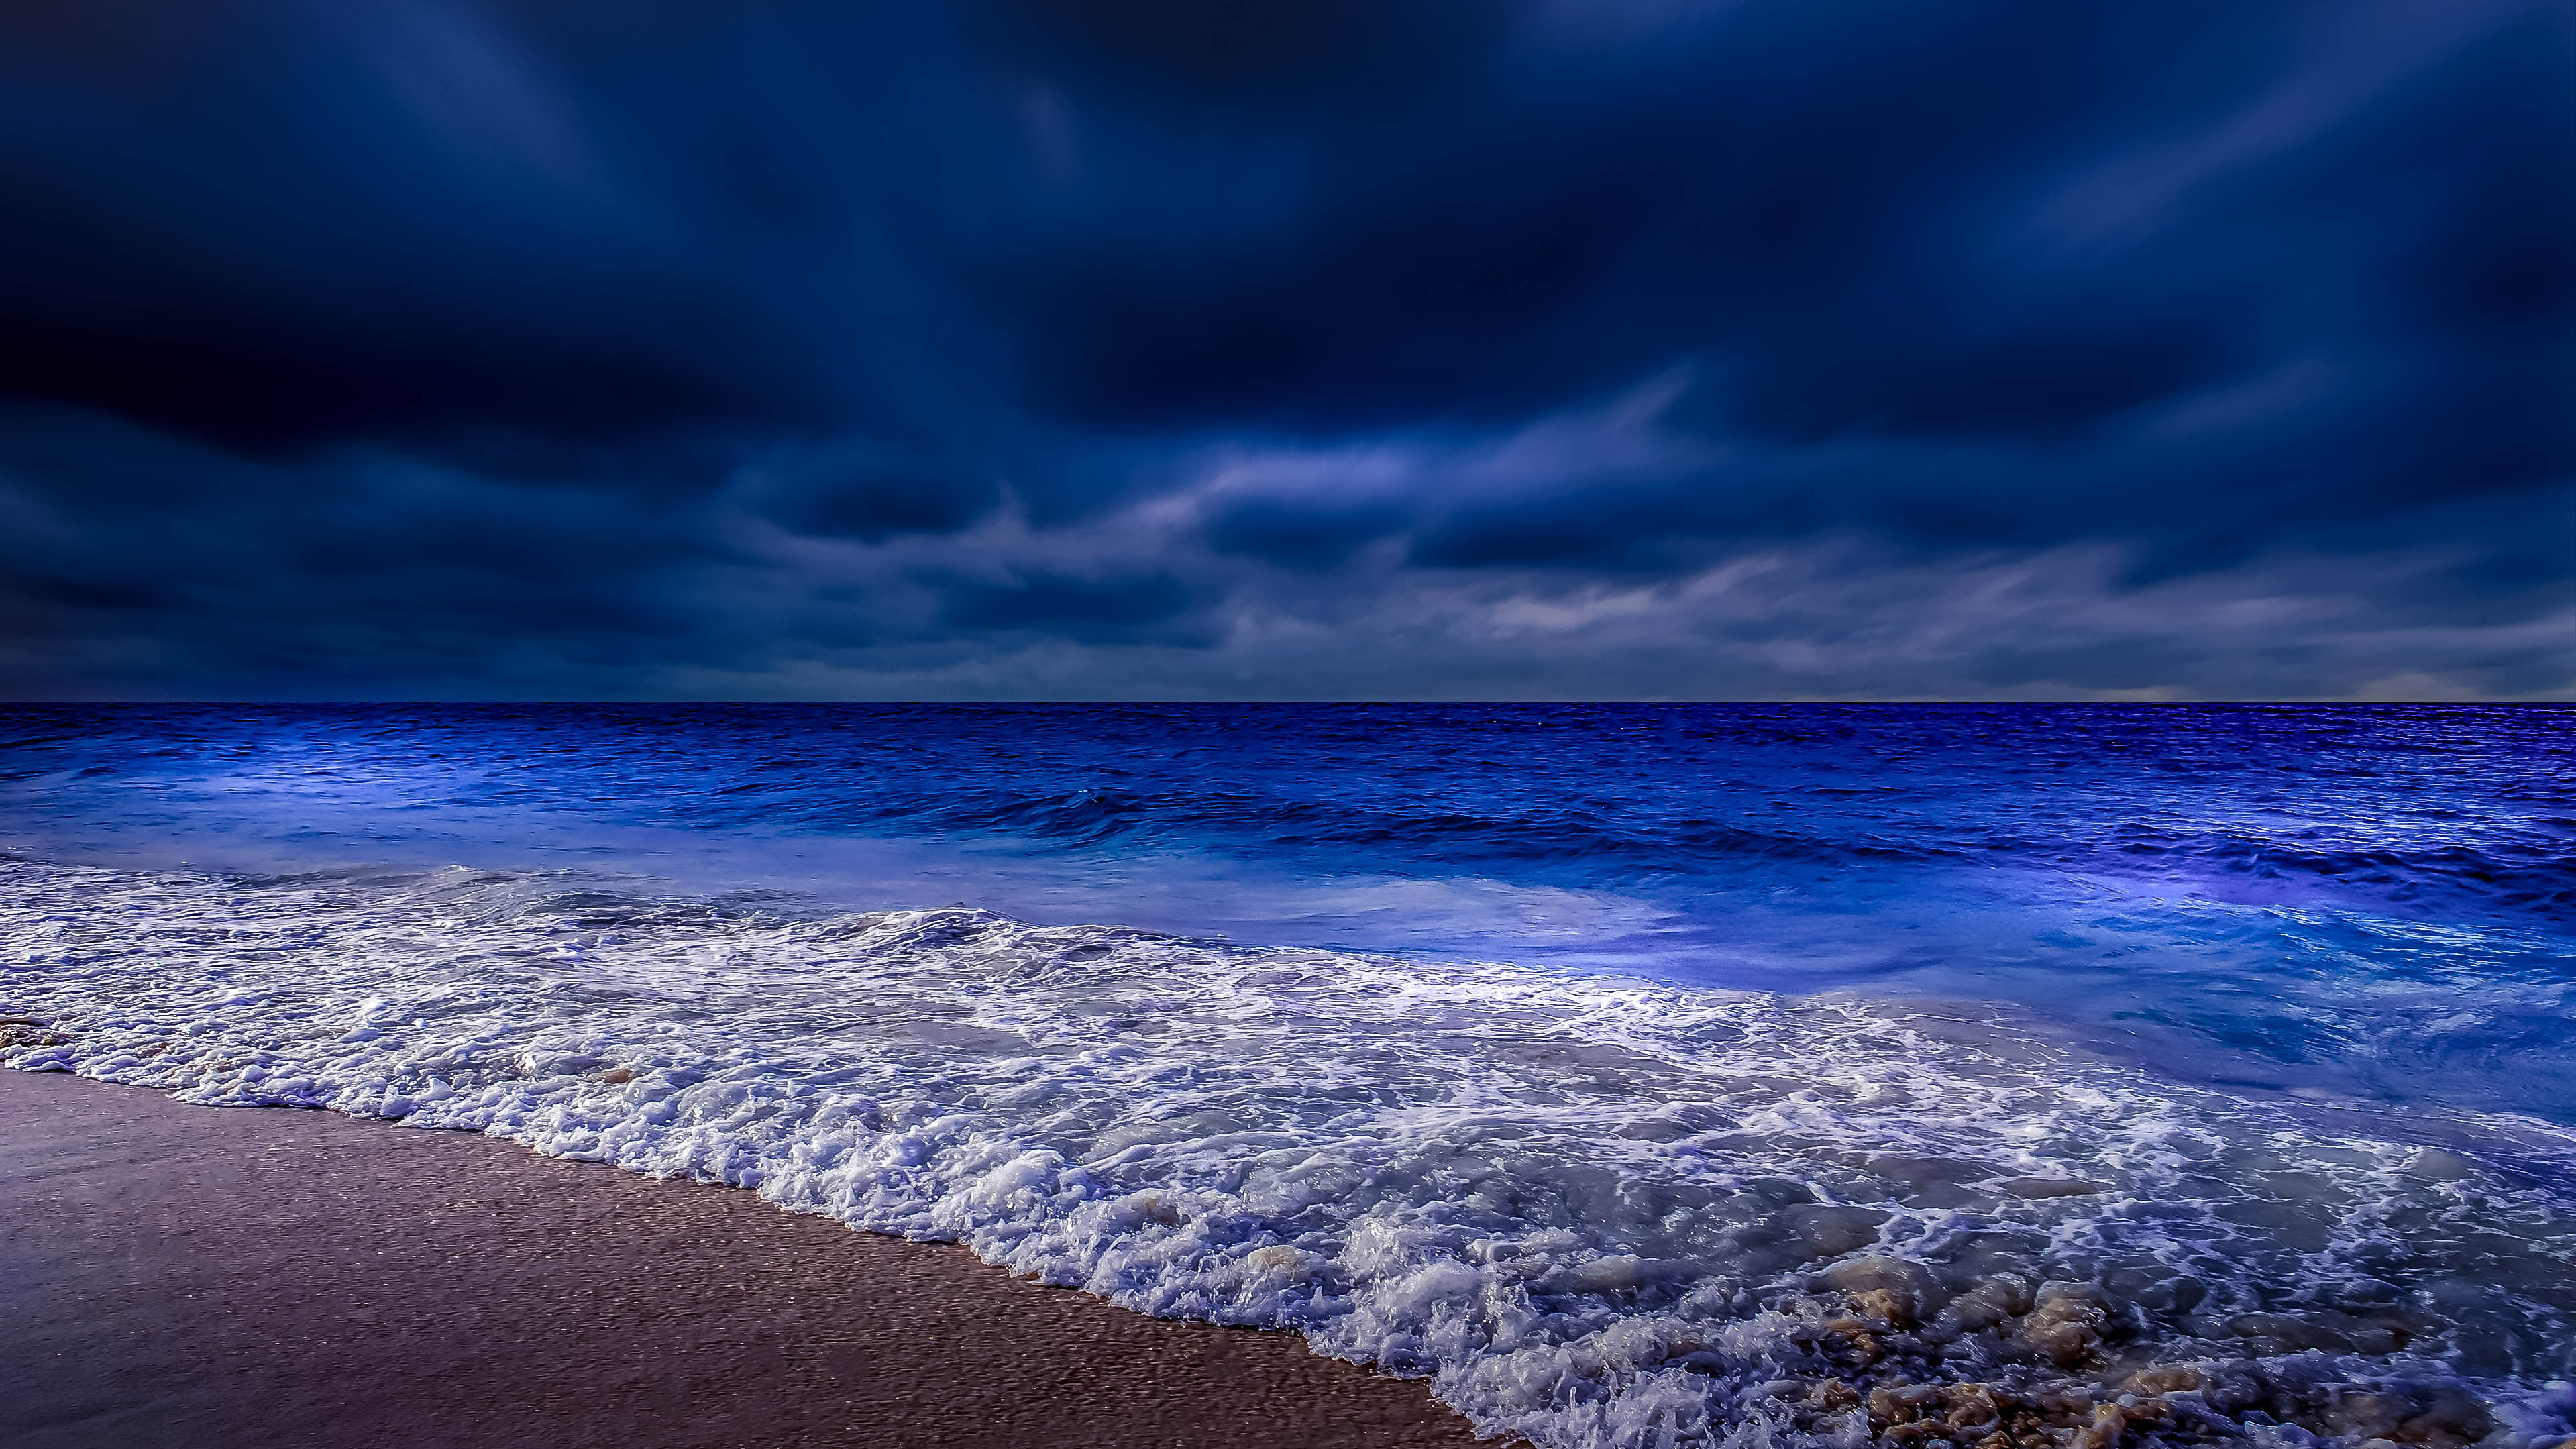 Sea Shore Waves At Night Time 4k Hd Nature 4k Wallpapers Images 73332 